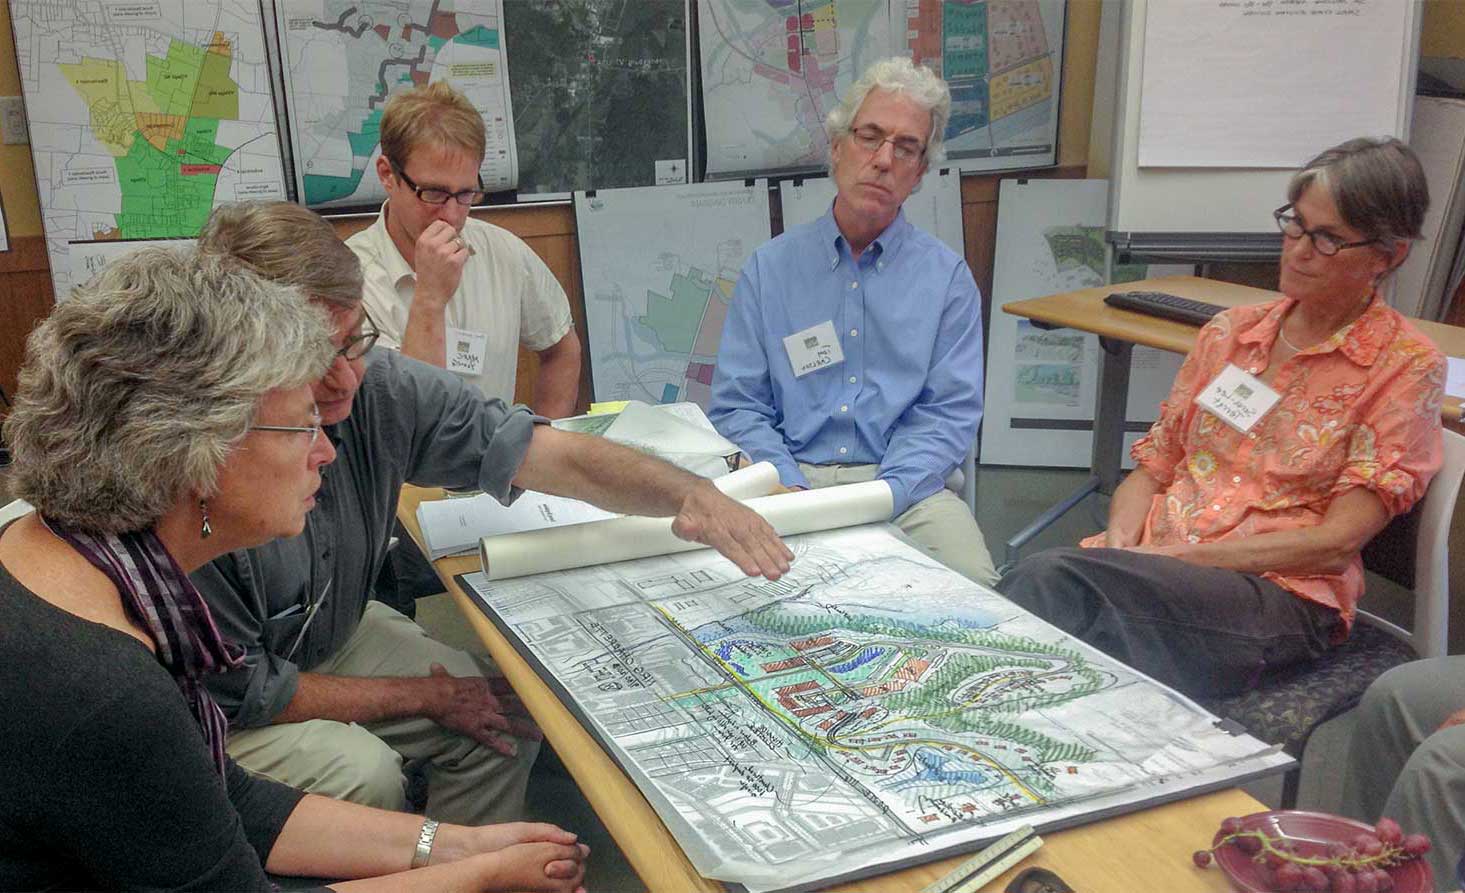 Maclay Architects has an open collaborative process